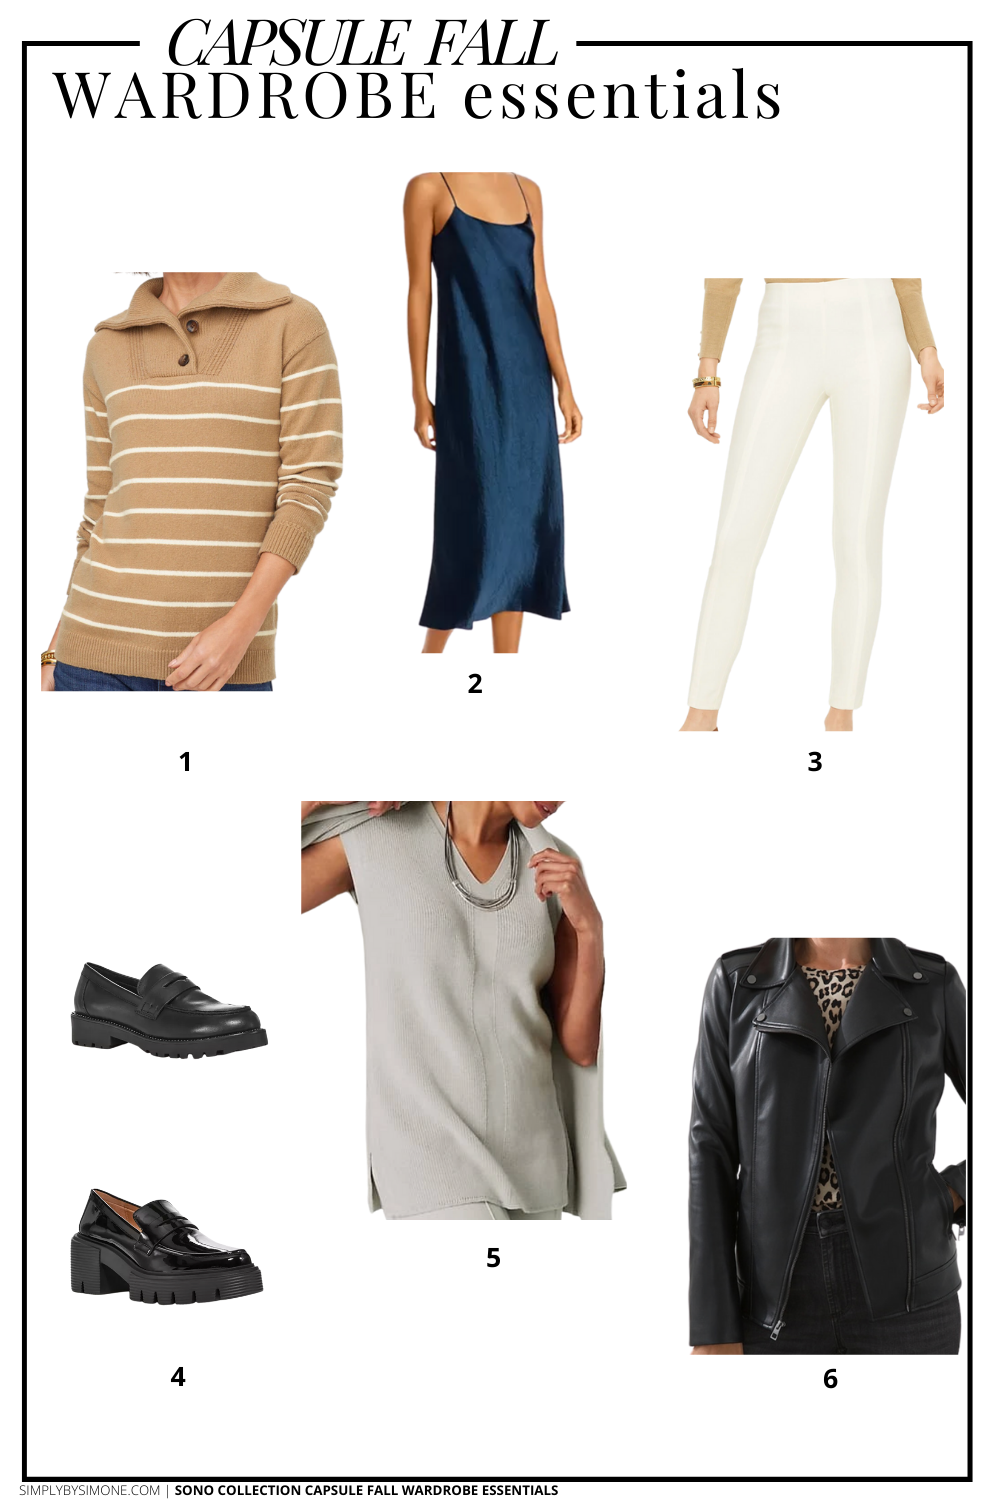  Capsule Wardrobe Essentials for Fall 2022 | The SoNo Collection Essential Capsule Wardrobe Items for Fall | 6 Essential Pieces | How to Build a Capsule Wardrobe | Fall Clothes | Outfit Inspiration | Fall Weather Outfit Ideas | Fall Vacation Packing Guide | Fall Capsule Wardrobe - What To Wear This Fall 2022 | Parisian Outfit Ideas | Items 1 to 6 | Simply by Simone